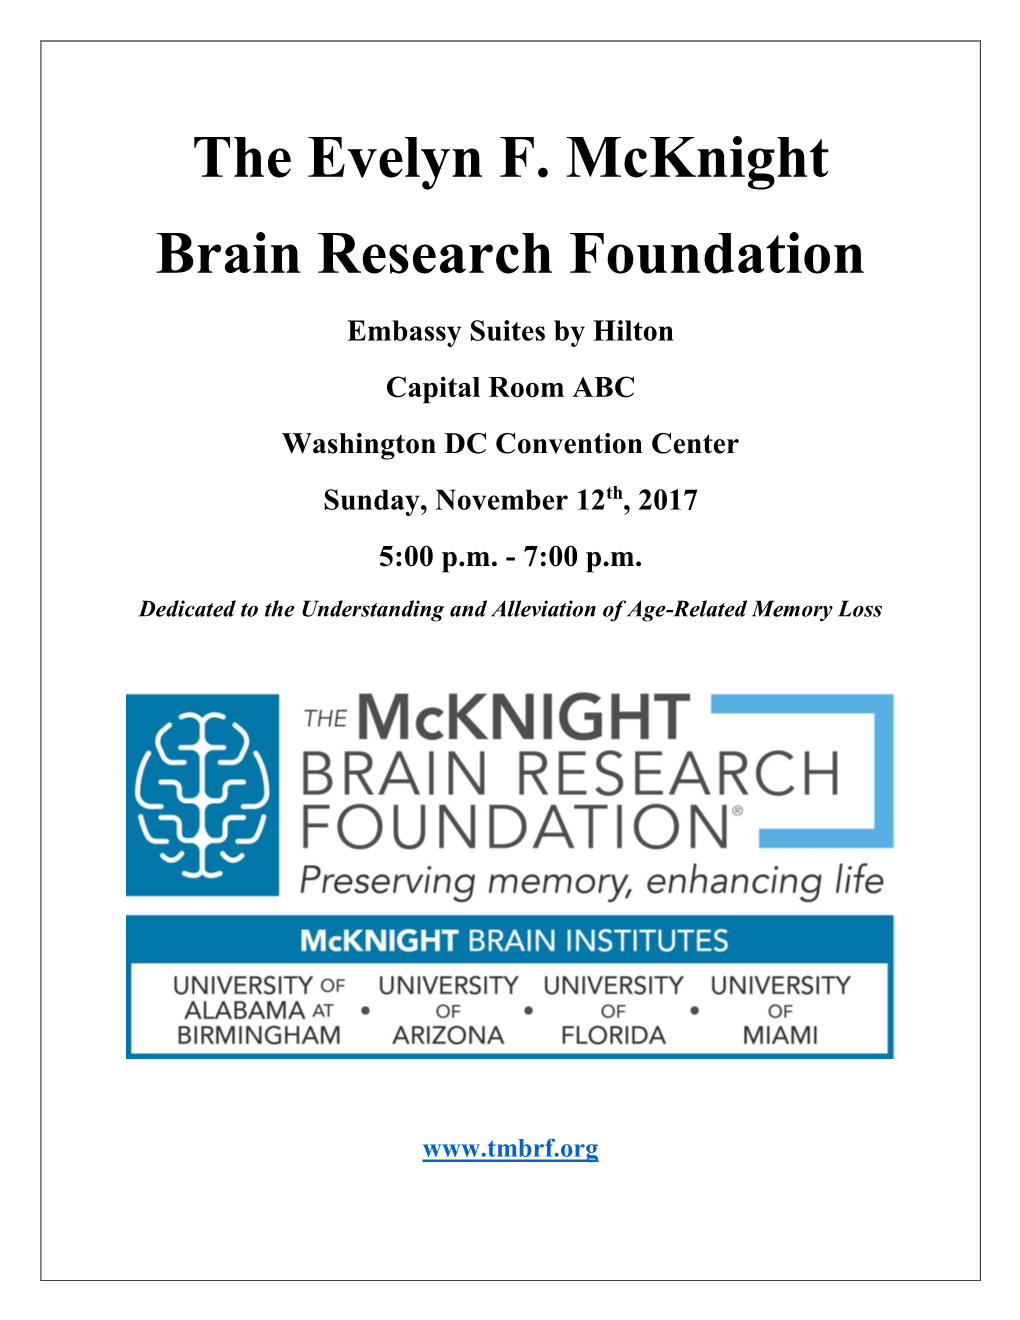 The Mcknight Brain Research Foundation for Making This Event Possible!